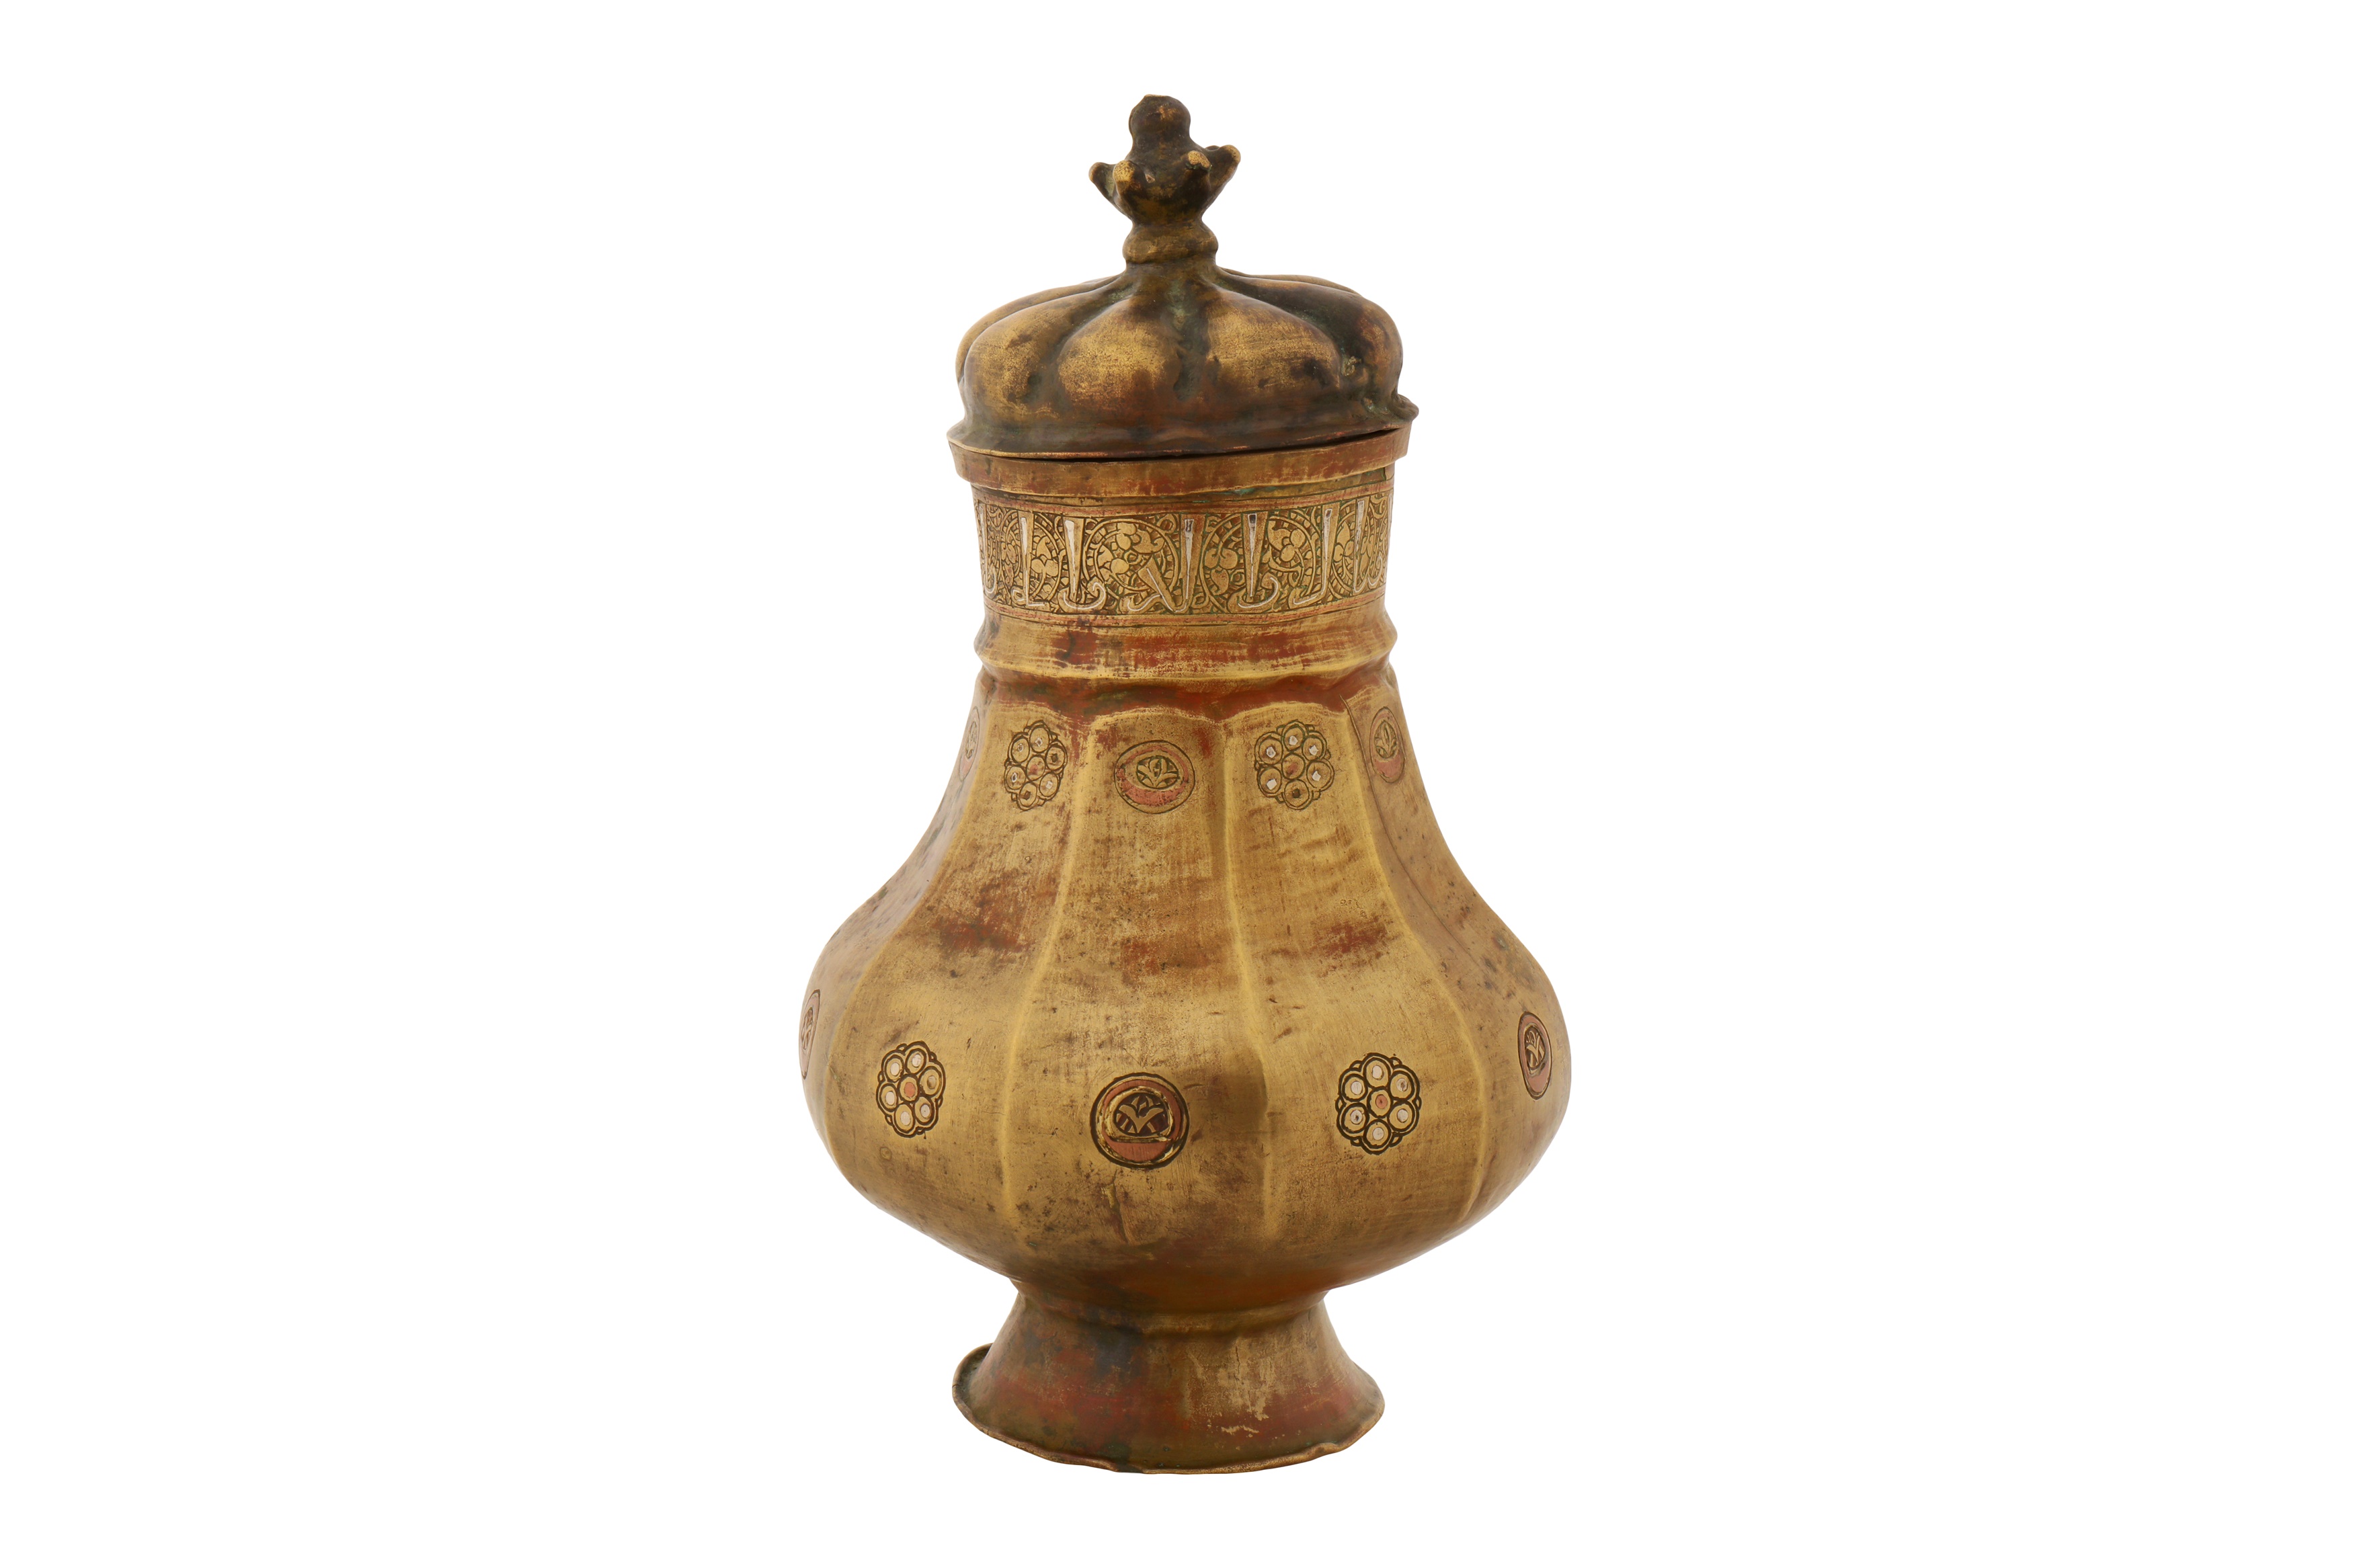 A 12TH CENTURY PERSIAN SELJUK JUG WITH SILVER AND COPPER INLAY - Image 3 of 4